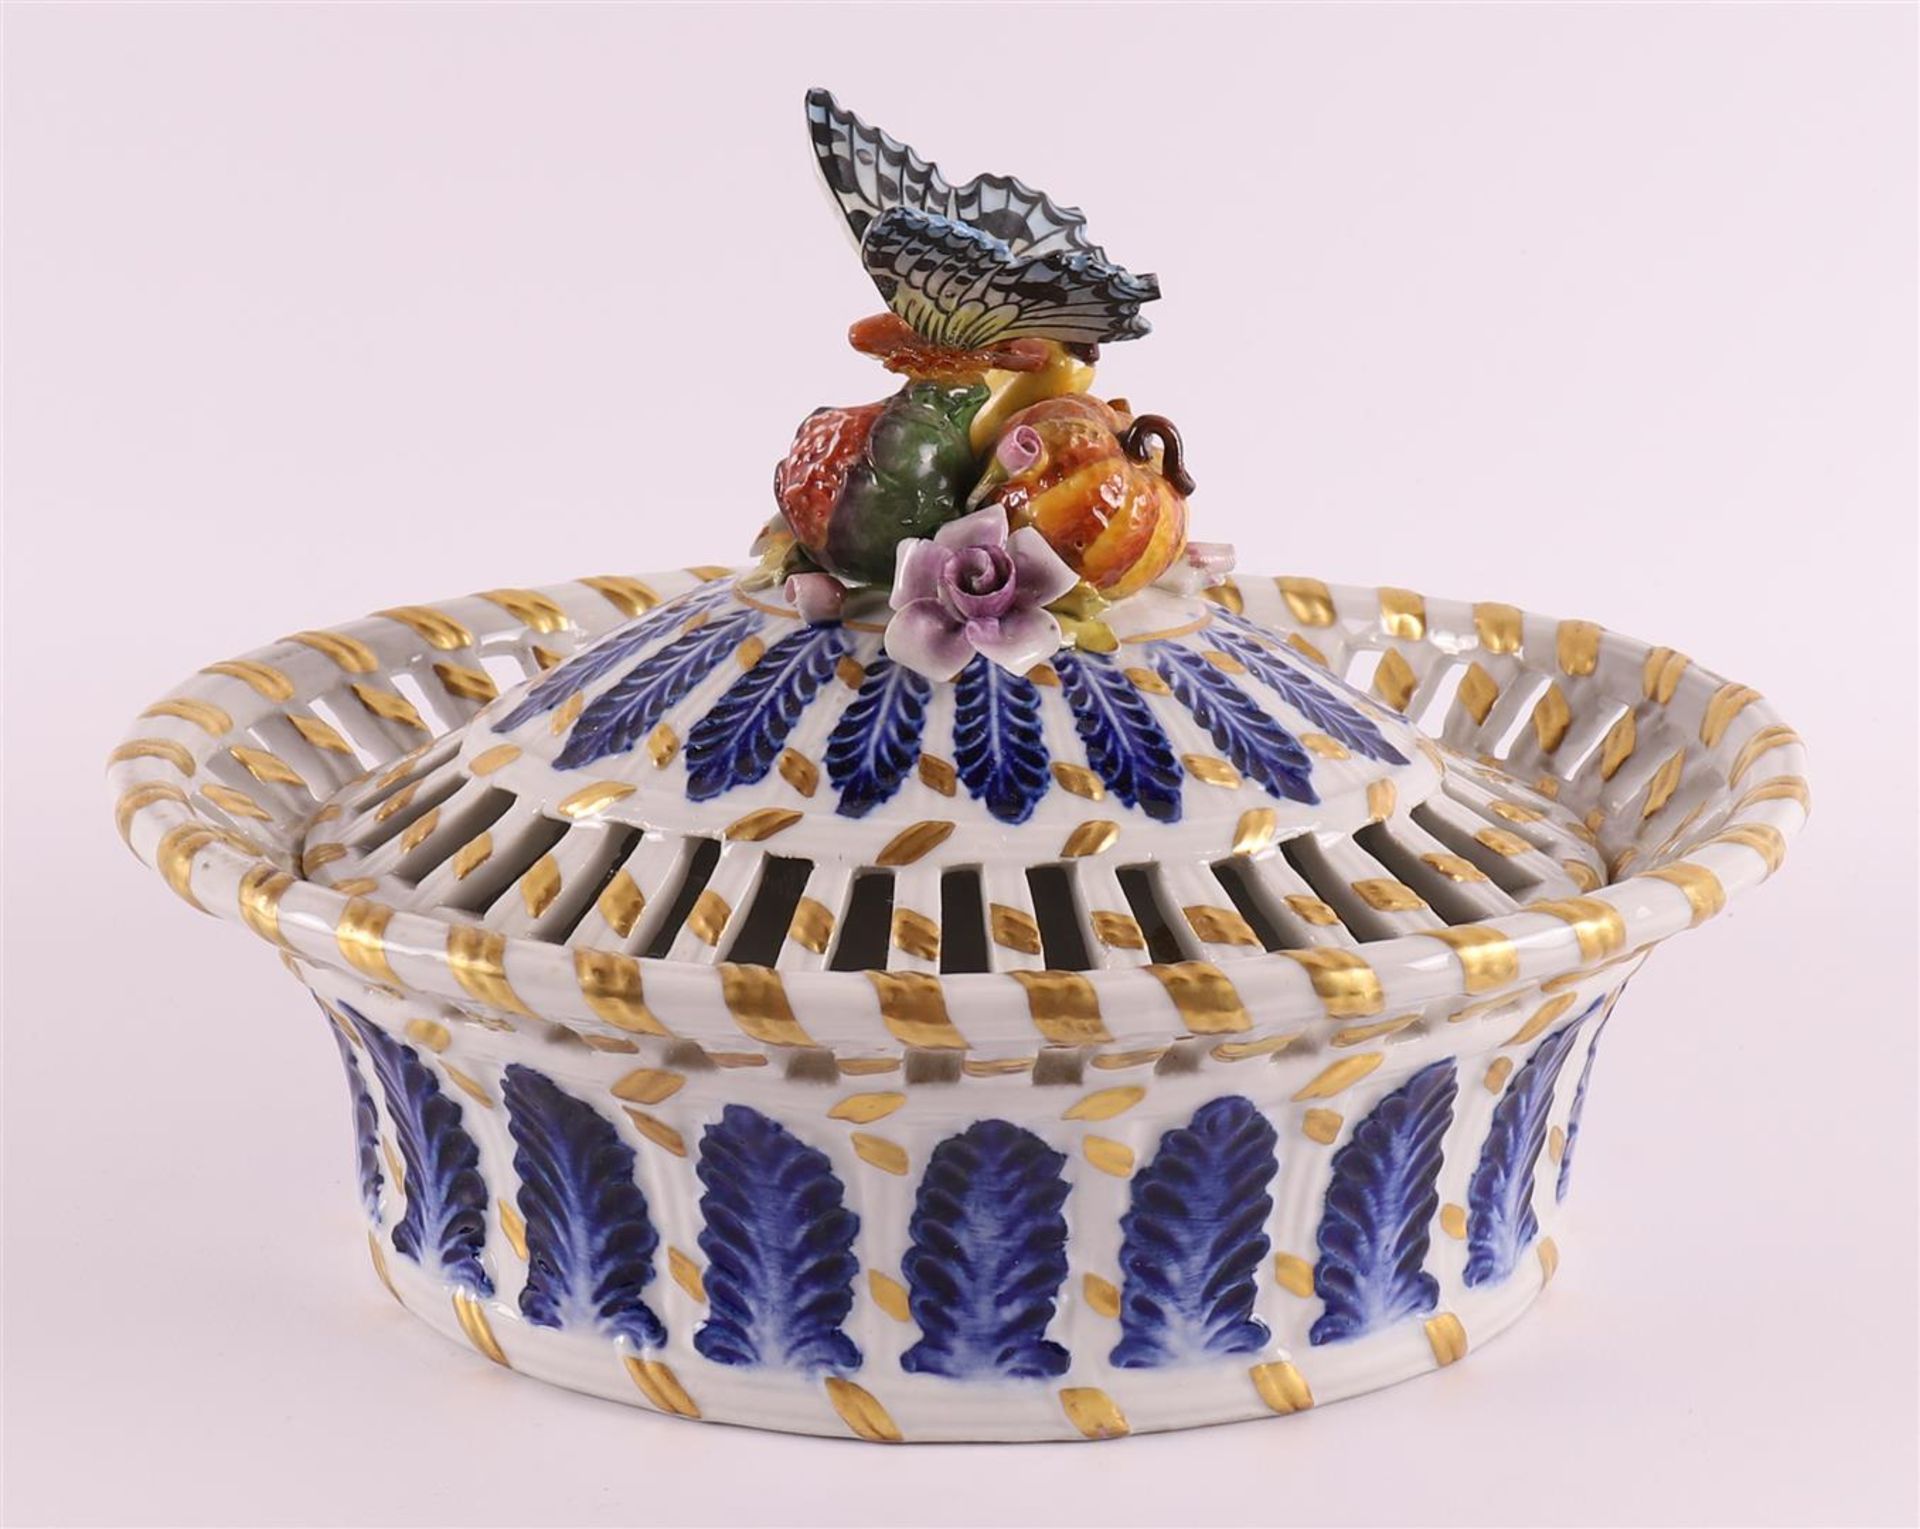 An oval porcelain lidded basket with openwork edge, France, Sèvres, 20th century. Polychrome